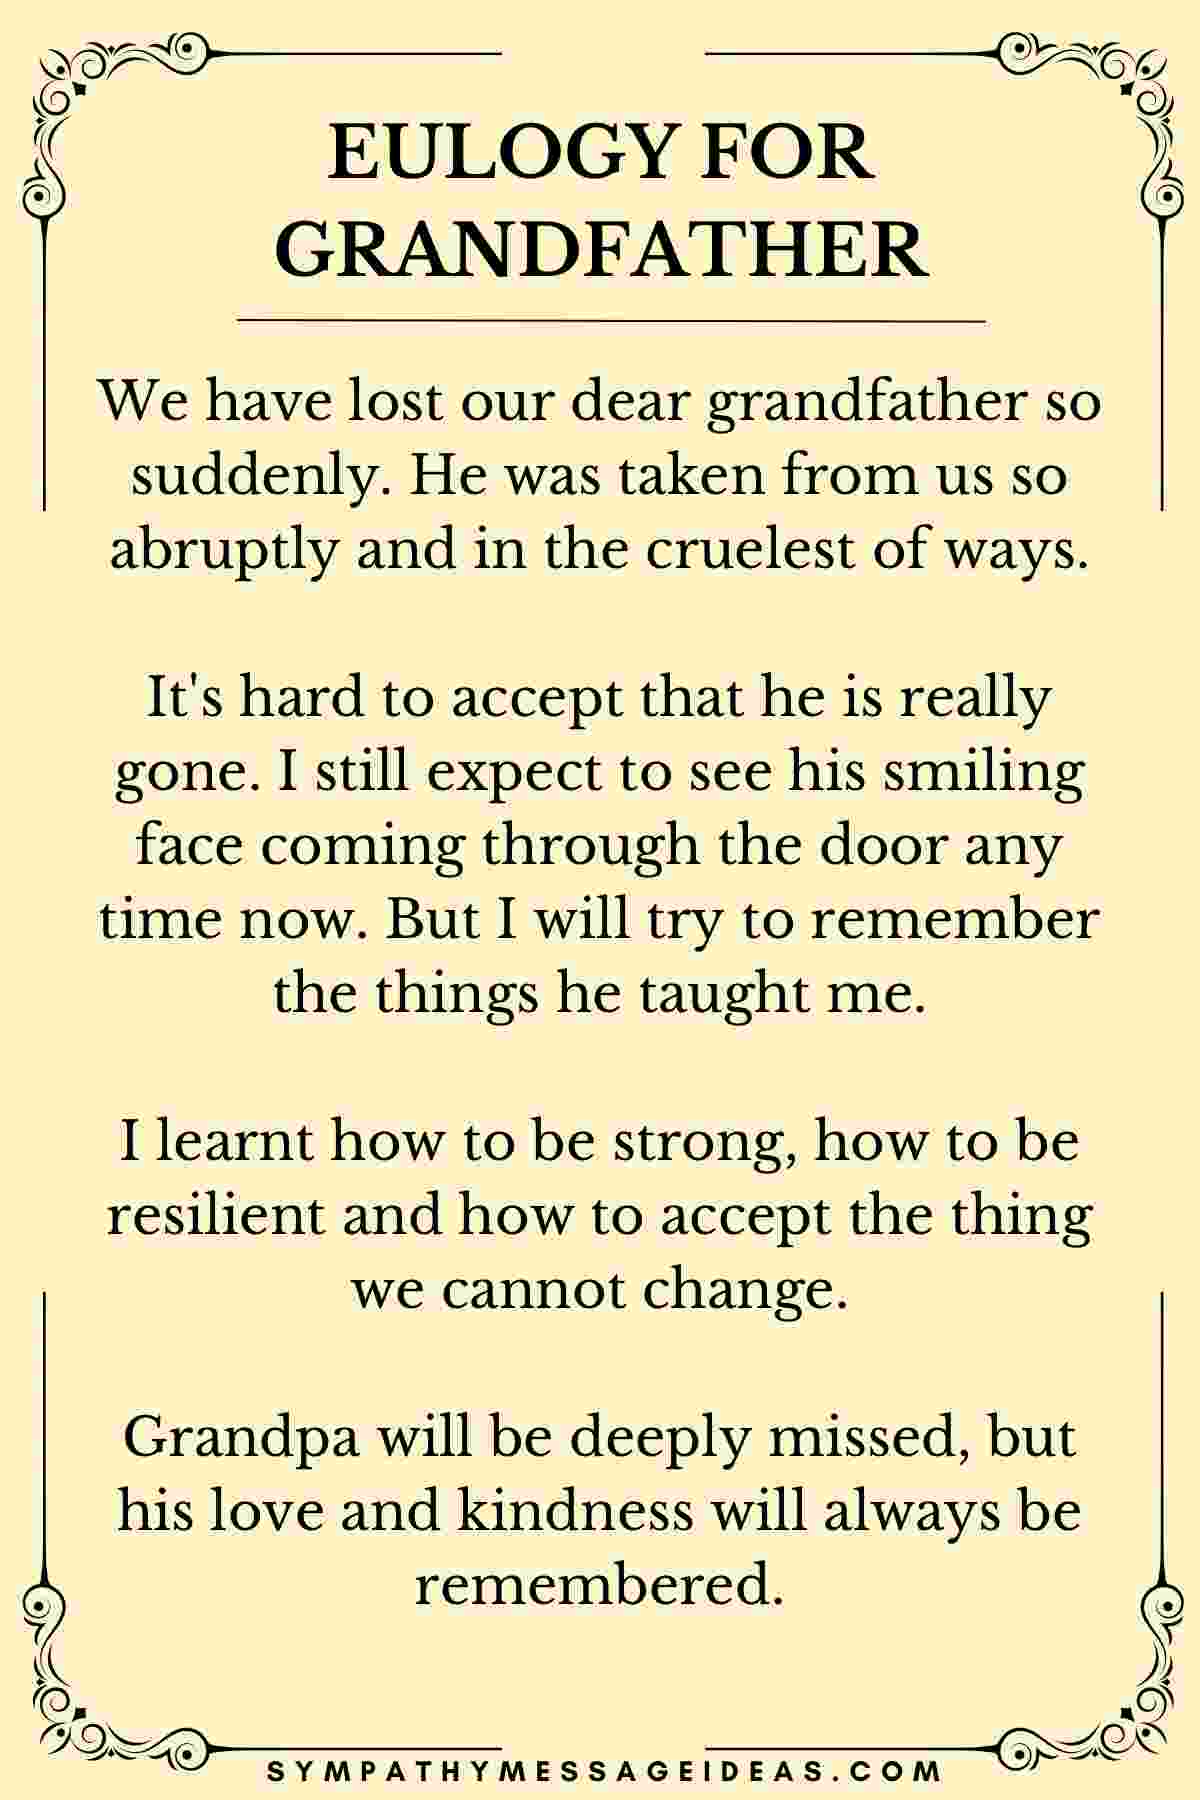 grandfather eulogy example